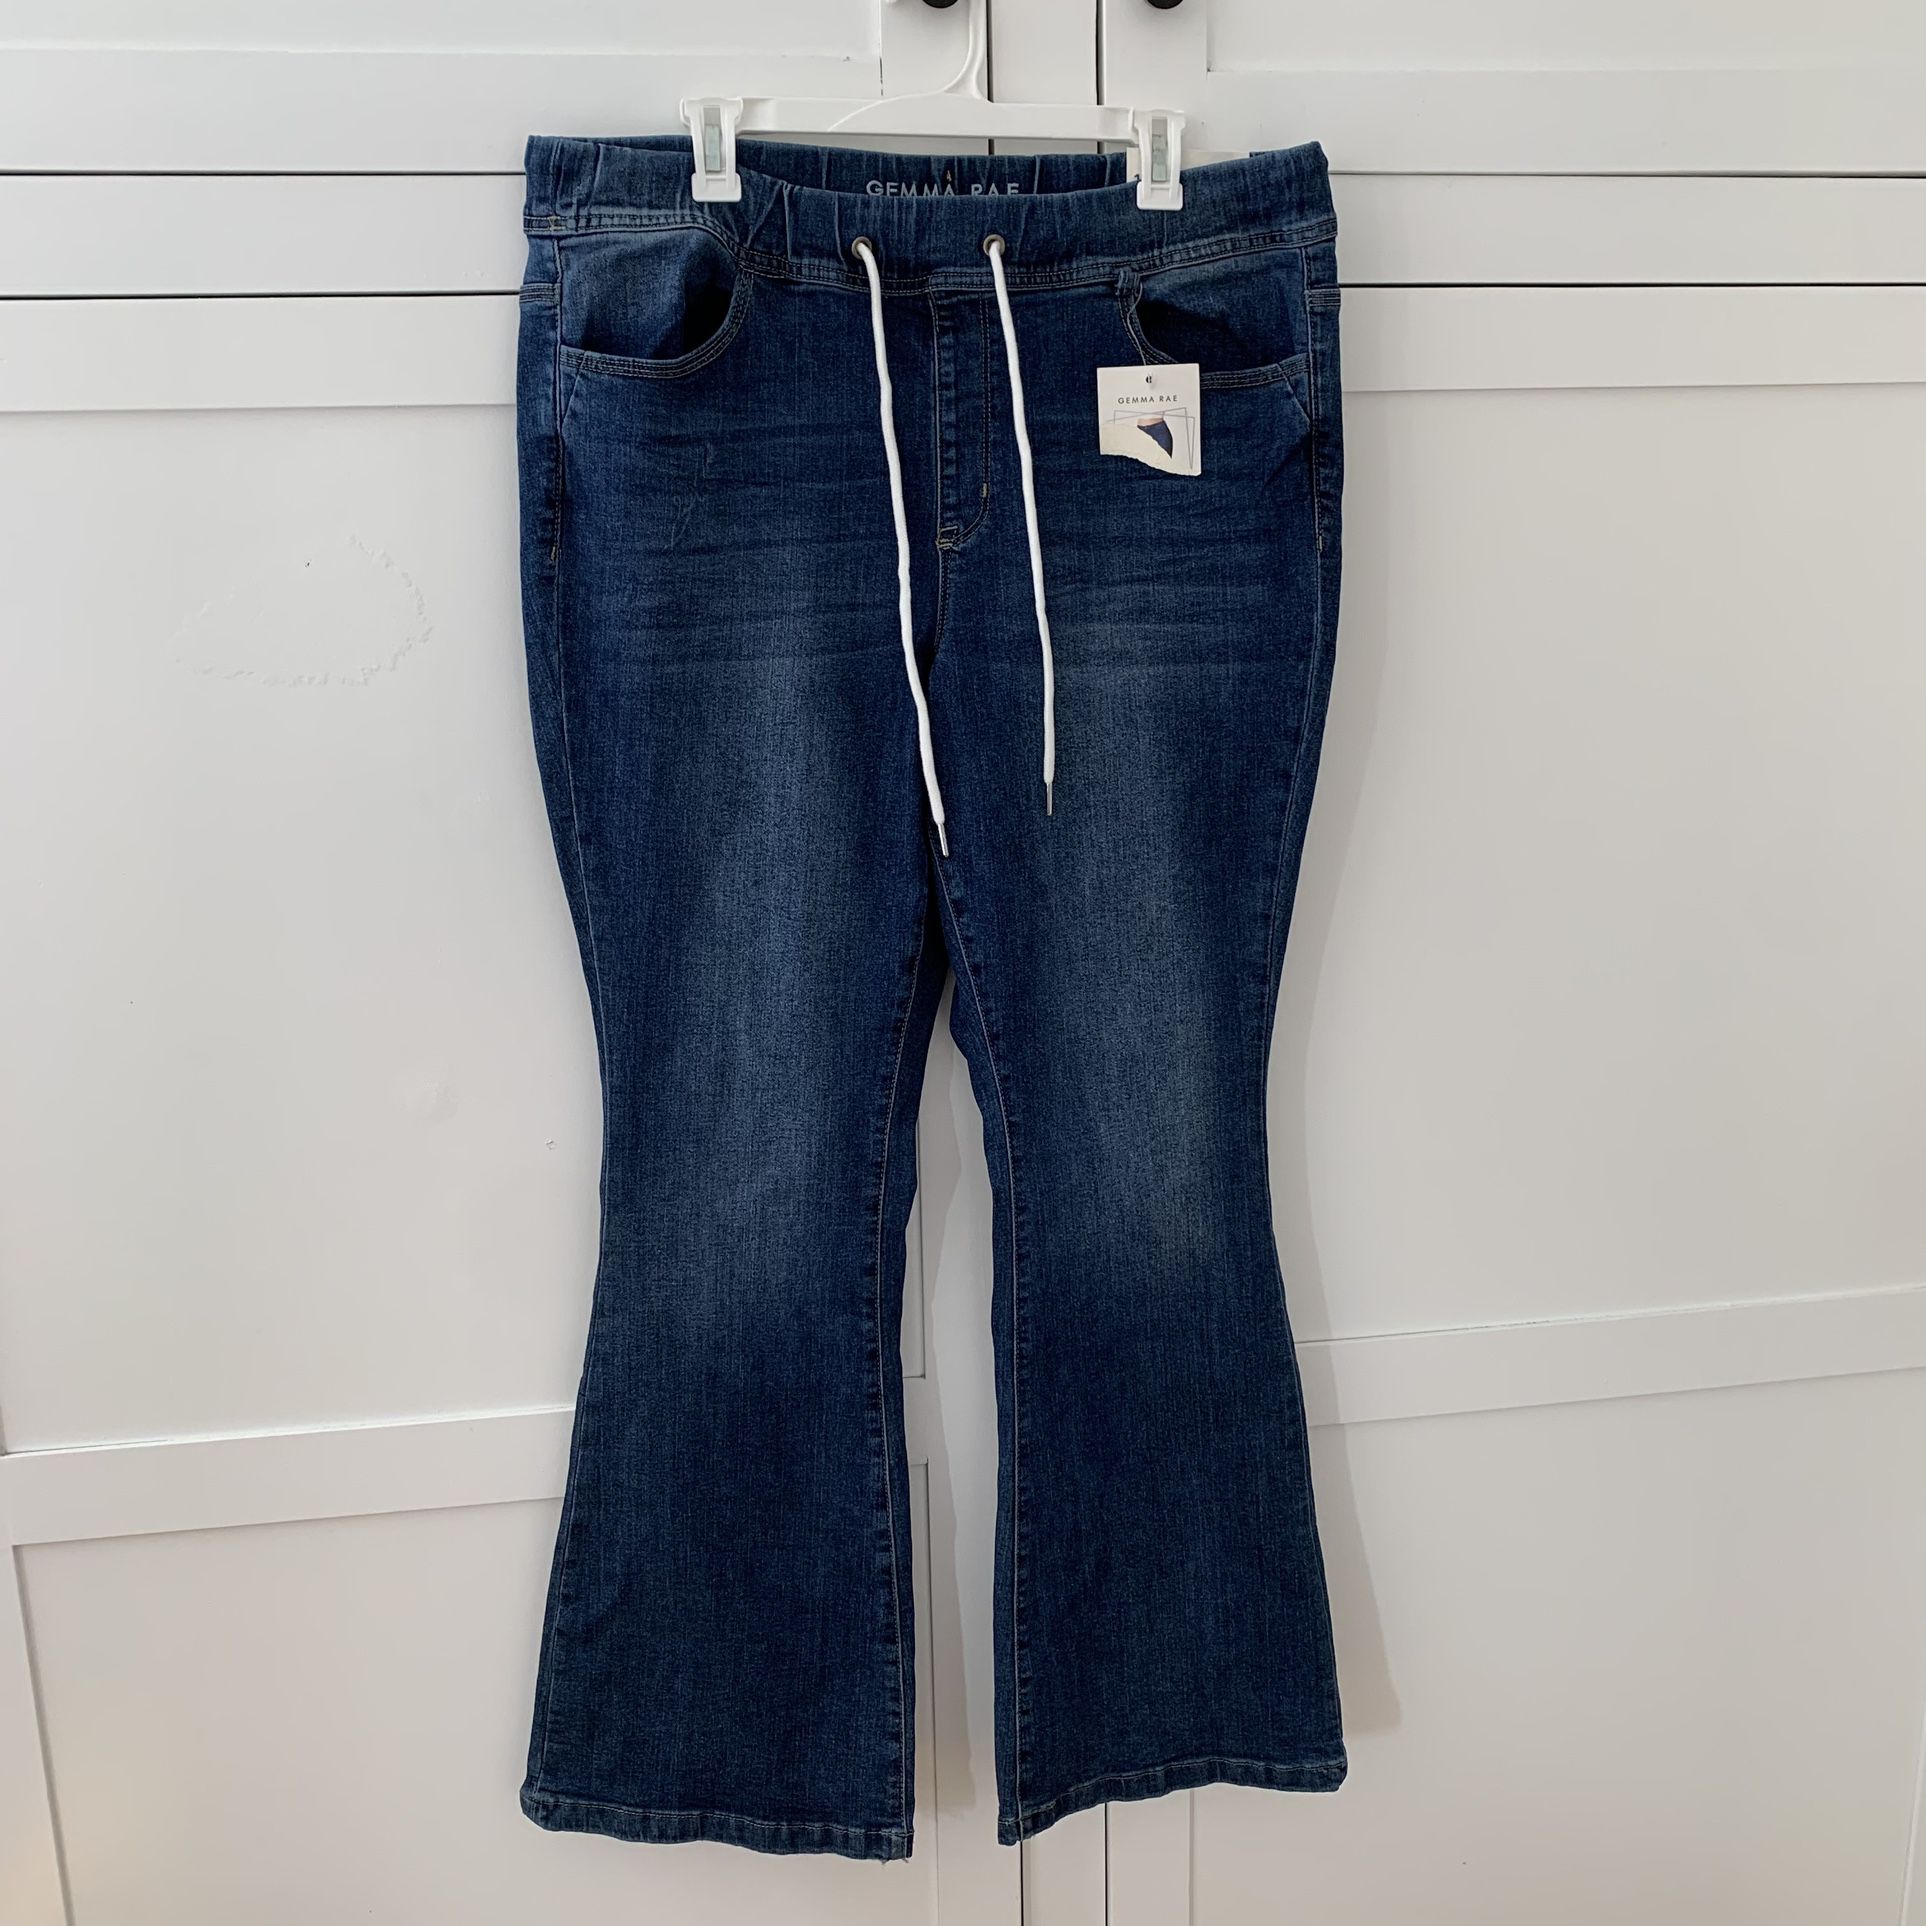 Gemma Rae High Rise Pull On Flare Jeans Size 16W